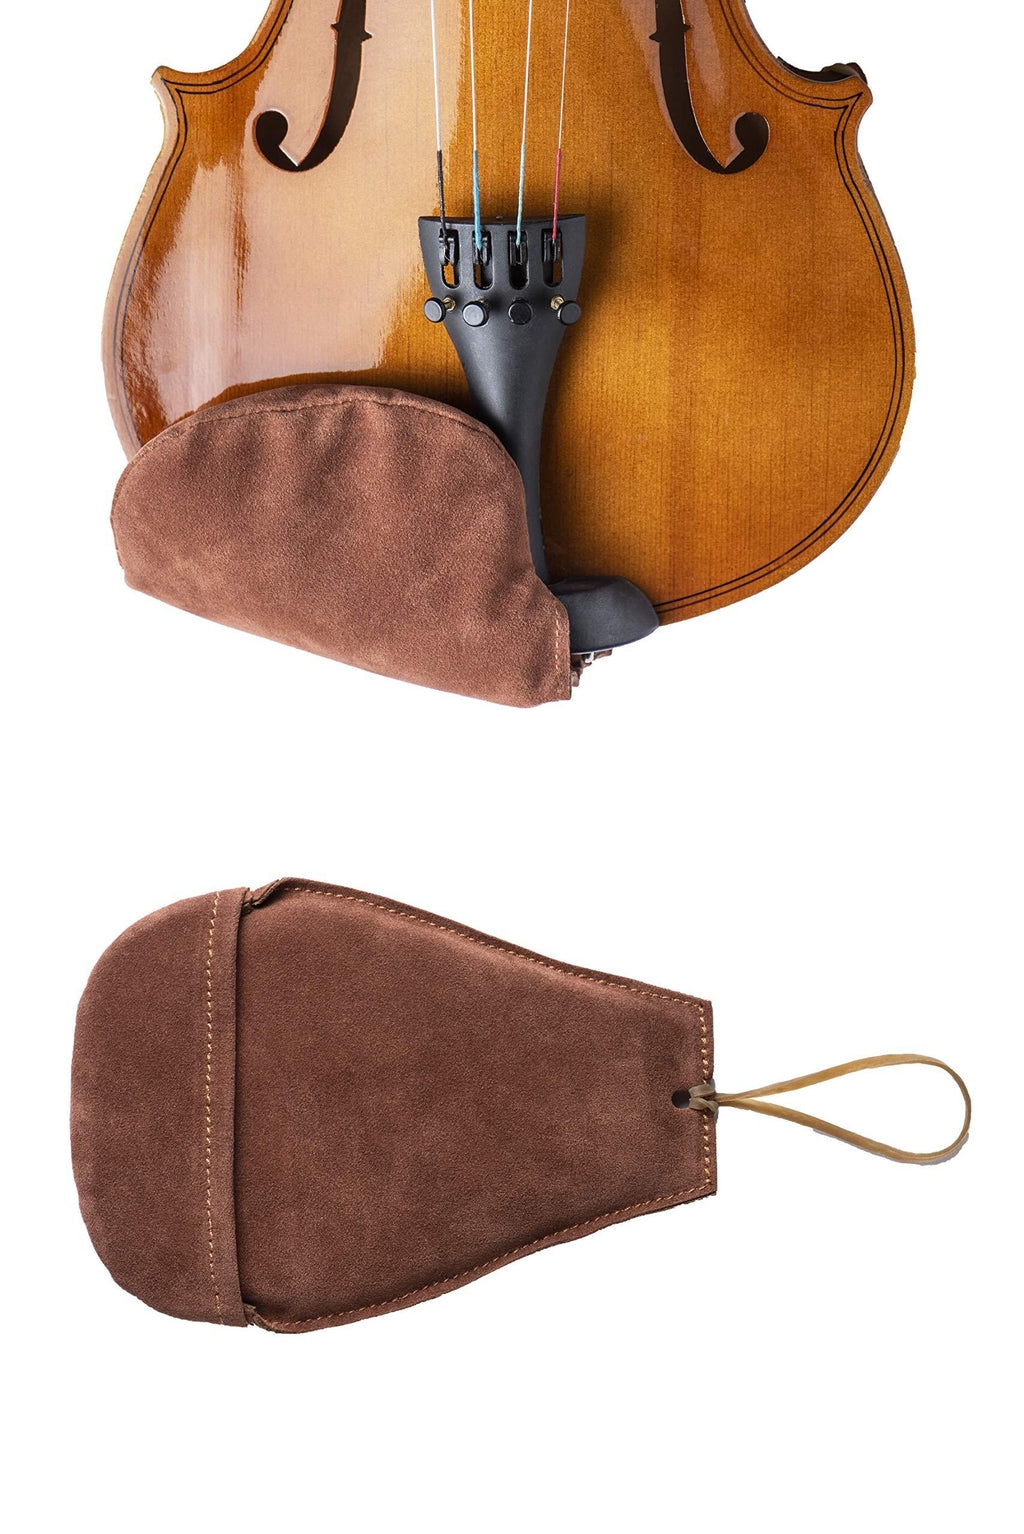 New West Suede Chin Rest Cover for Violin and Viola Musical Instruments, Brown, Thin Comfortable Chinrest and Soft Foam Lining for Beginners and Professionals, Reduces Rubbing and Irritation